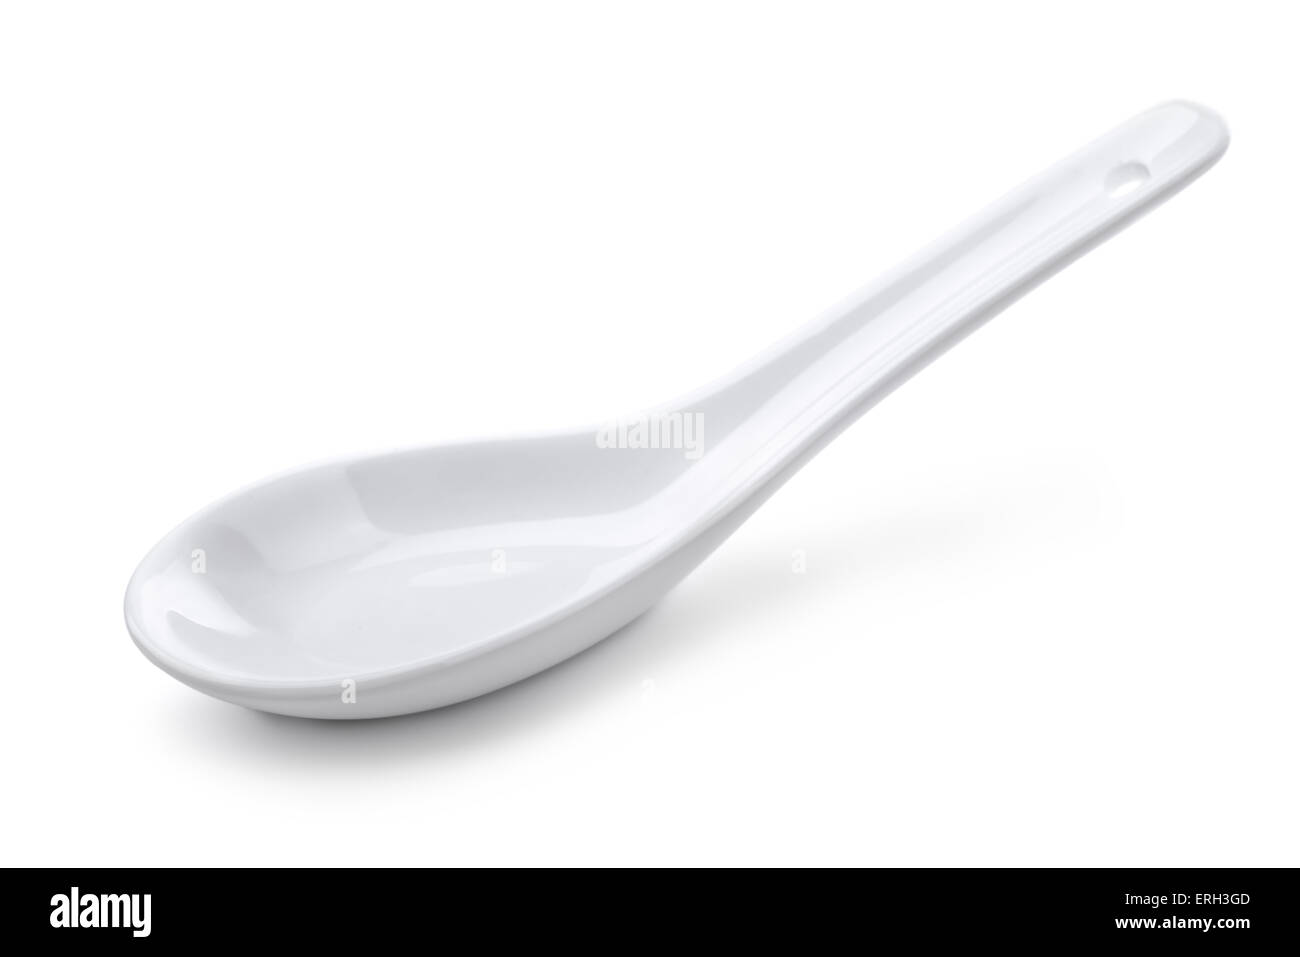 Chinese spoon isolated on white Stock Photo